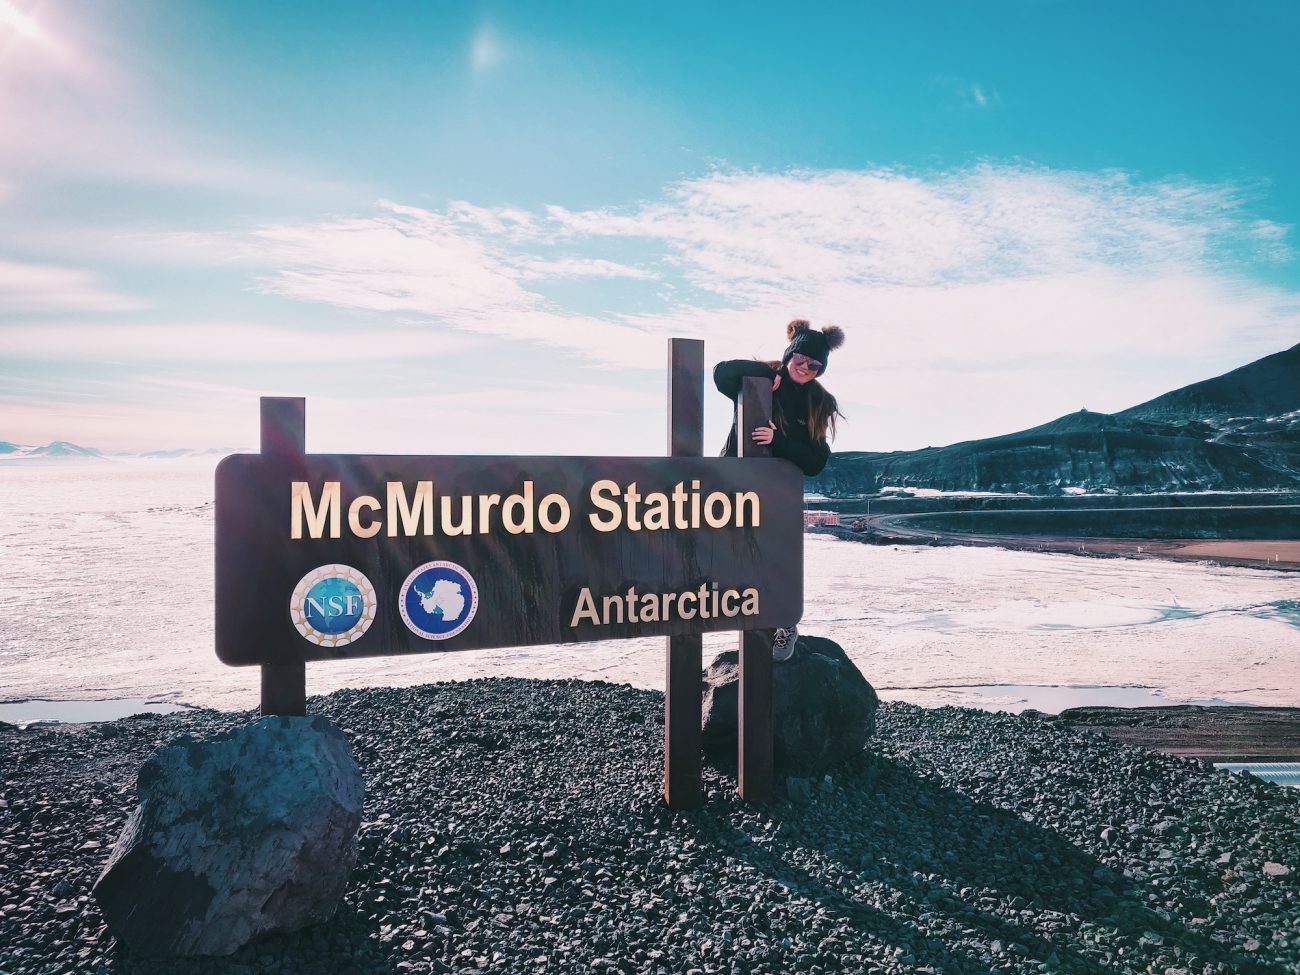 A girl stands next to the McMurdo Station sign in Antarctica-- another job that travels (no experience necessary)